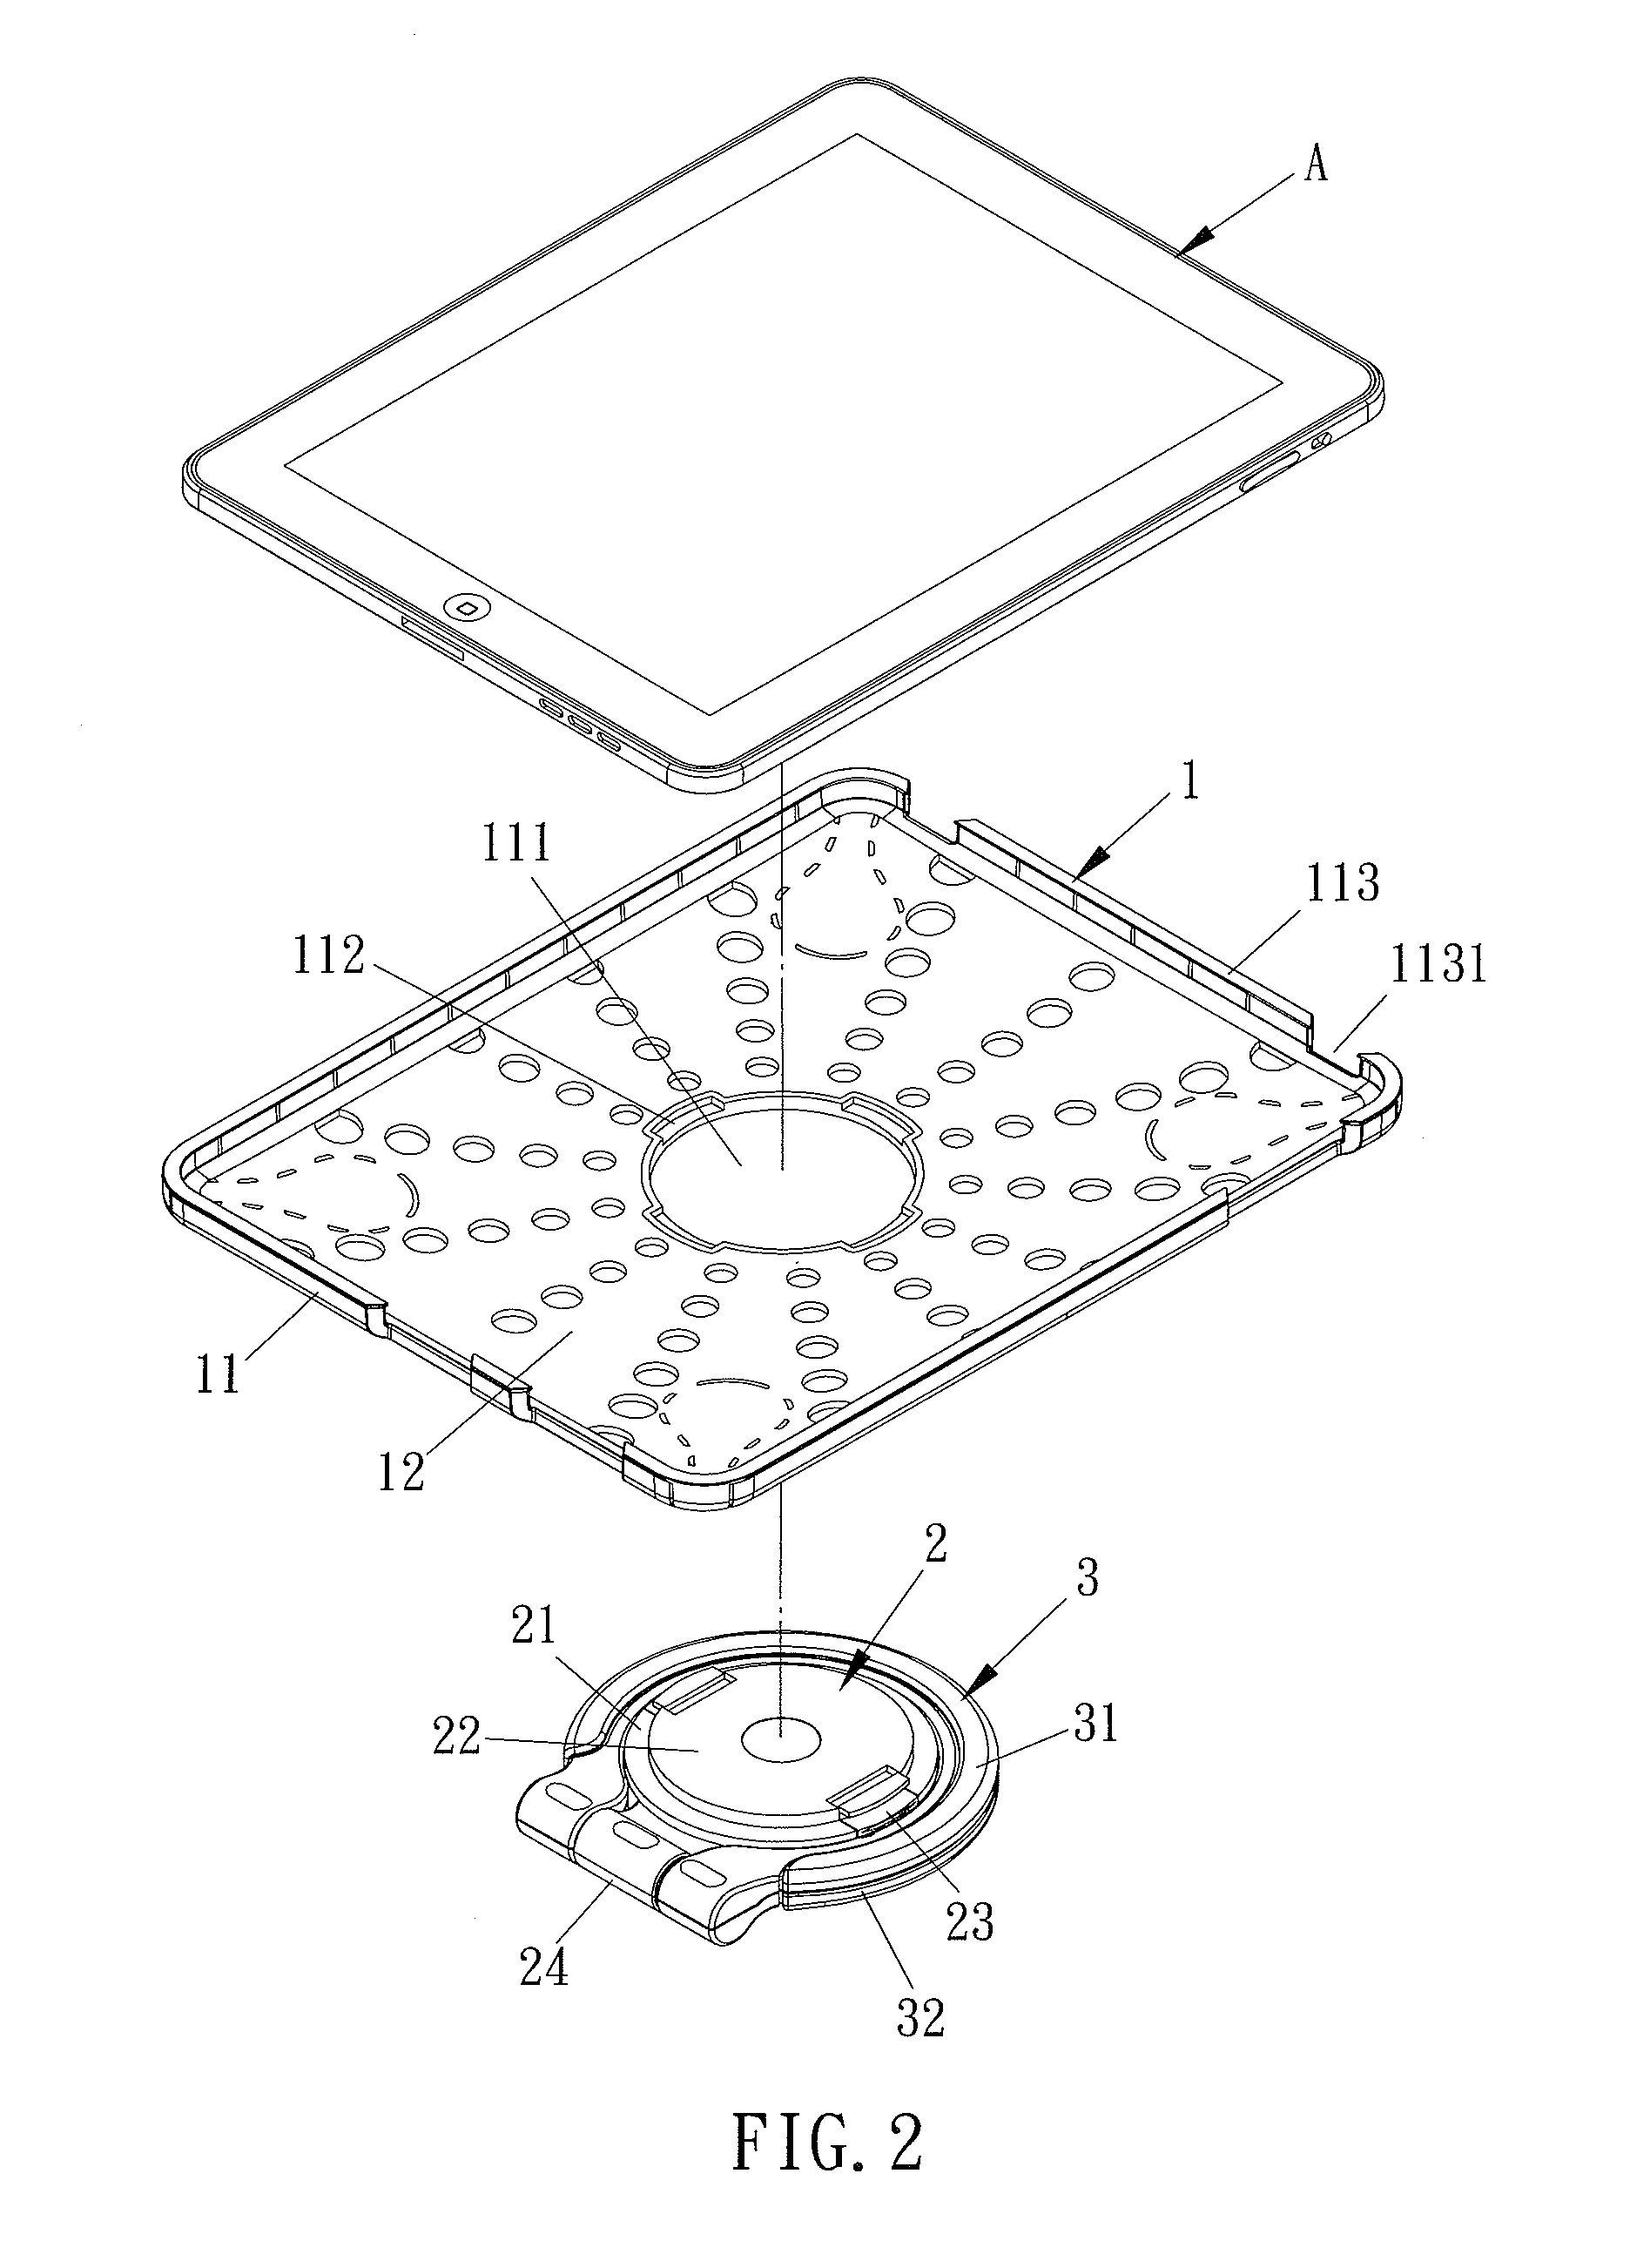 Support Structure of a Digital Device